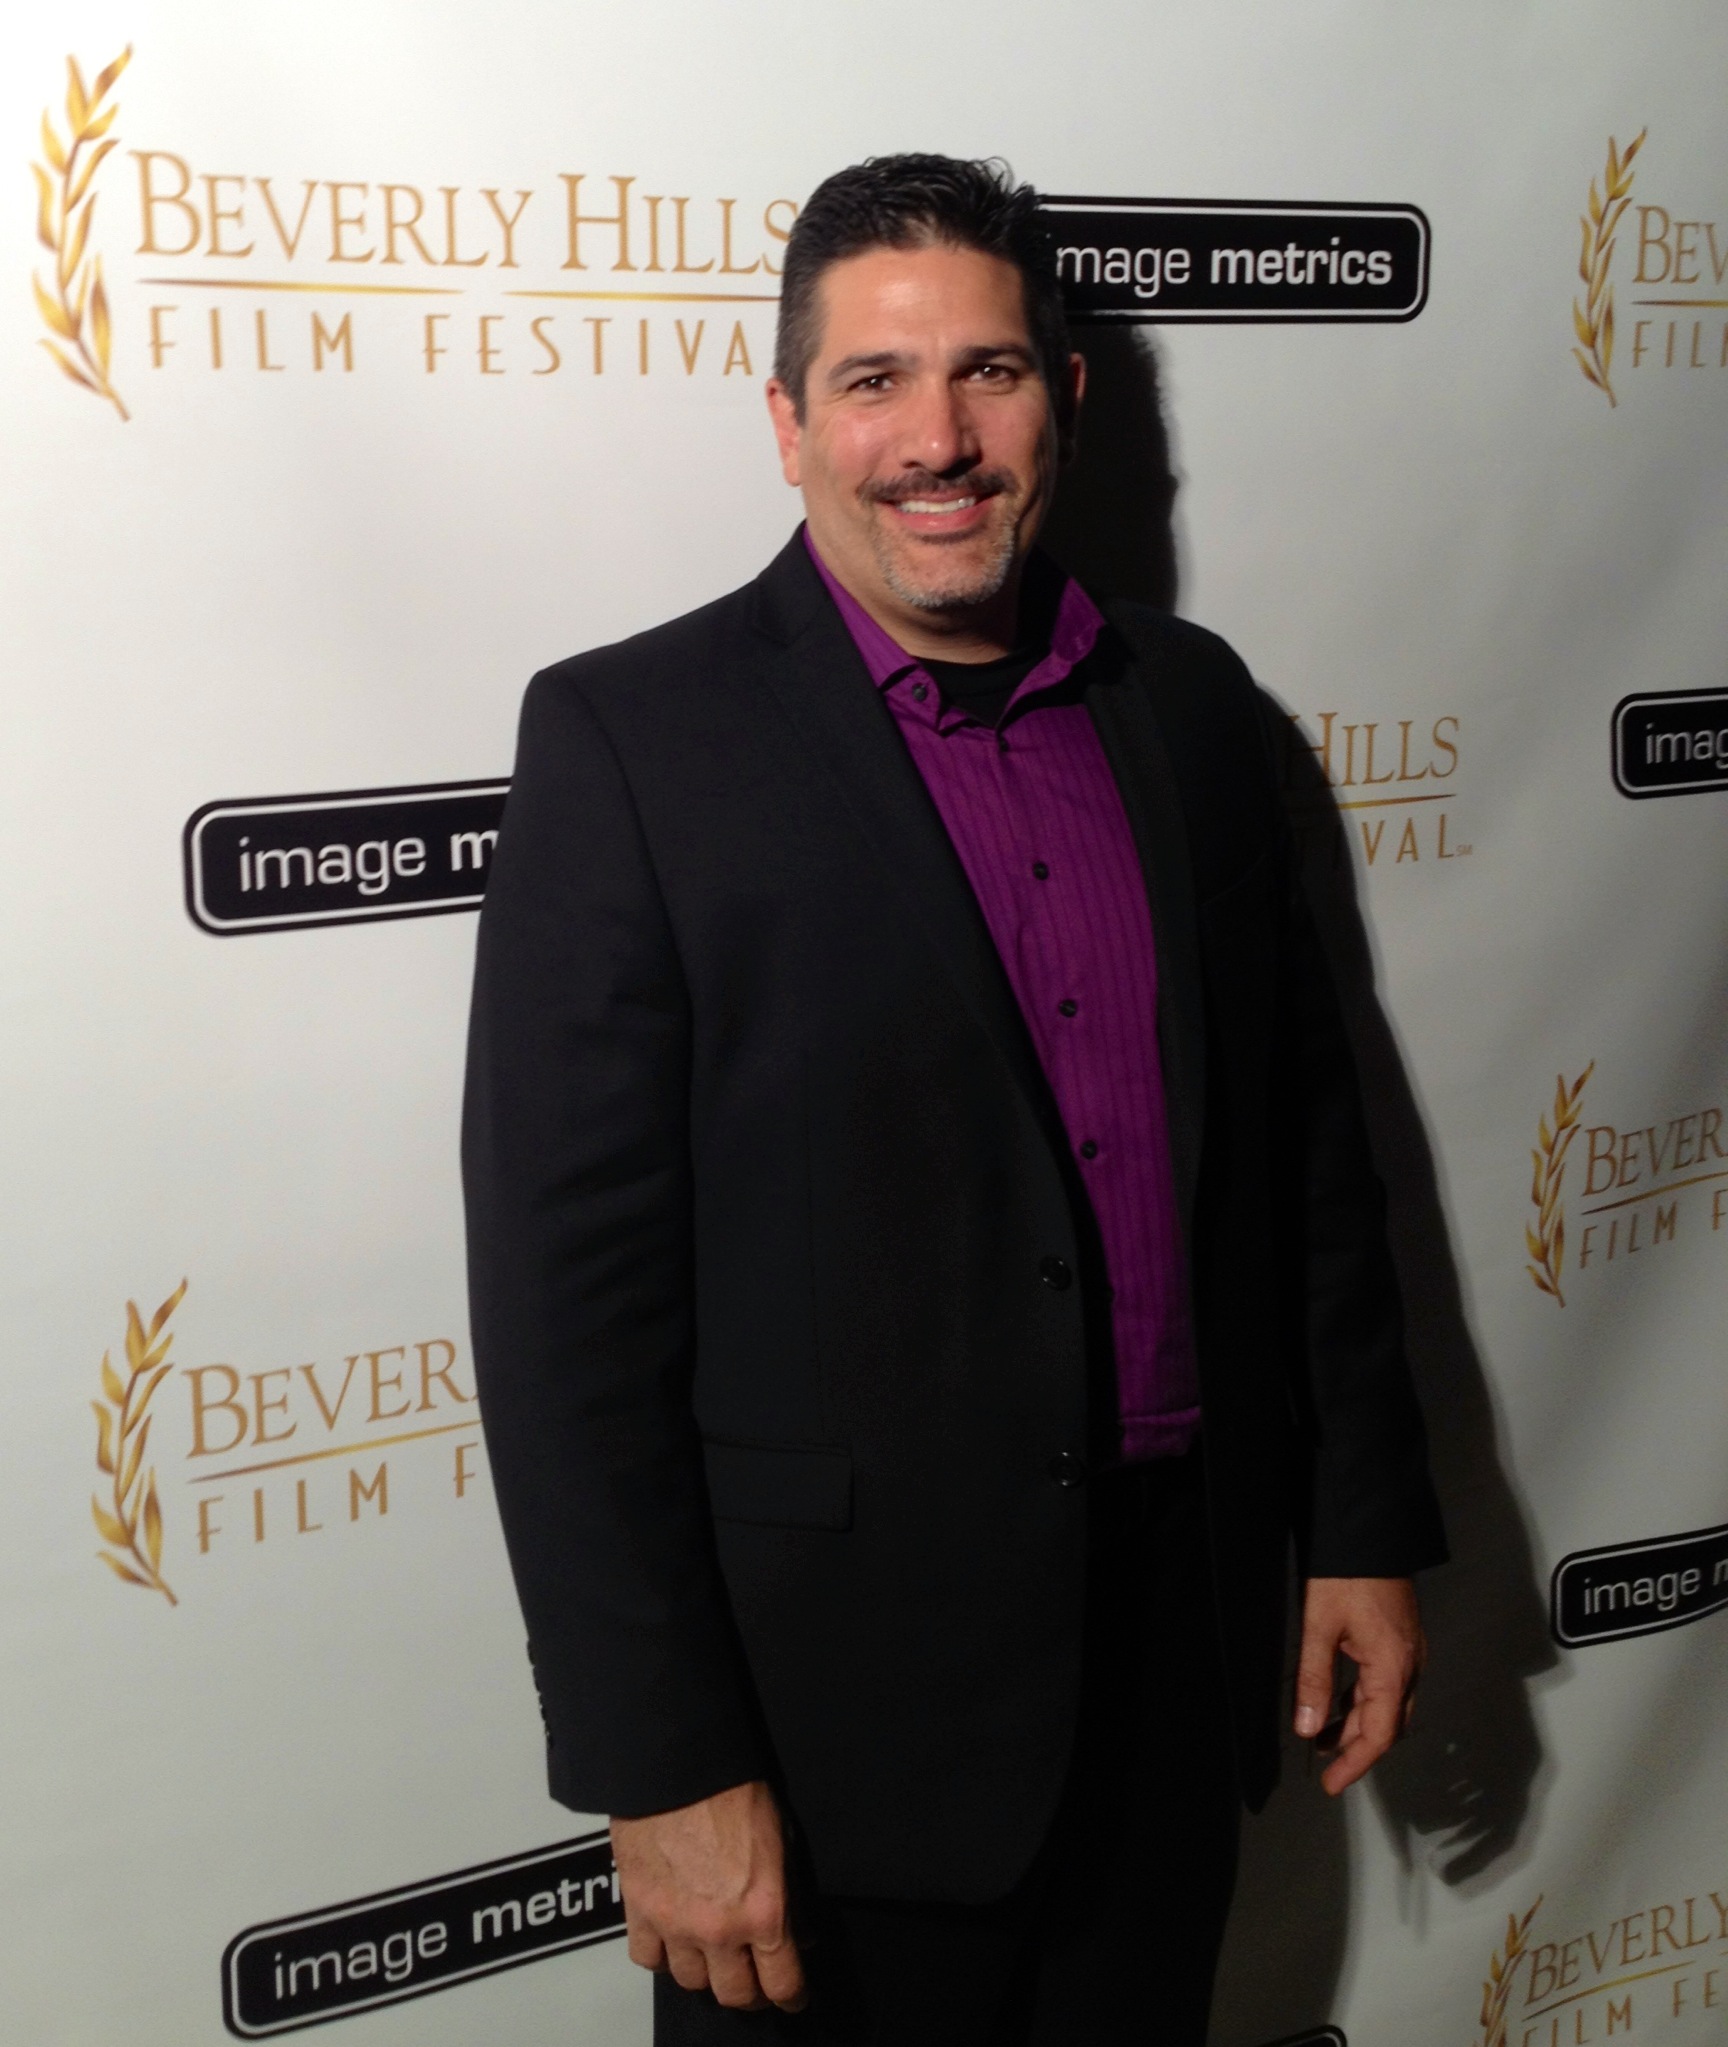 Thomas Haley at the Beverly Hills Film Festival, as Officer Arriaga in 